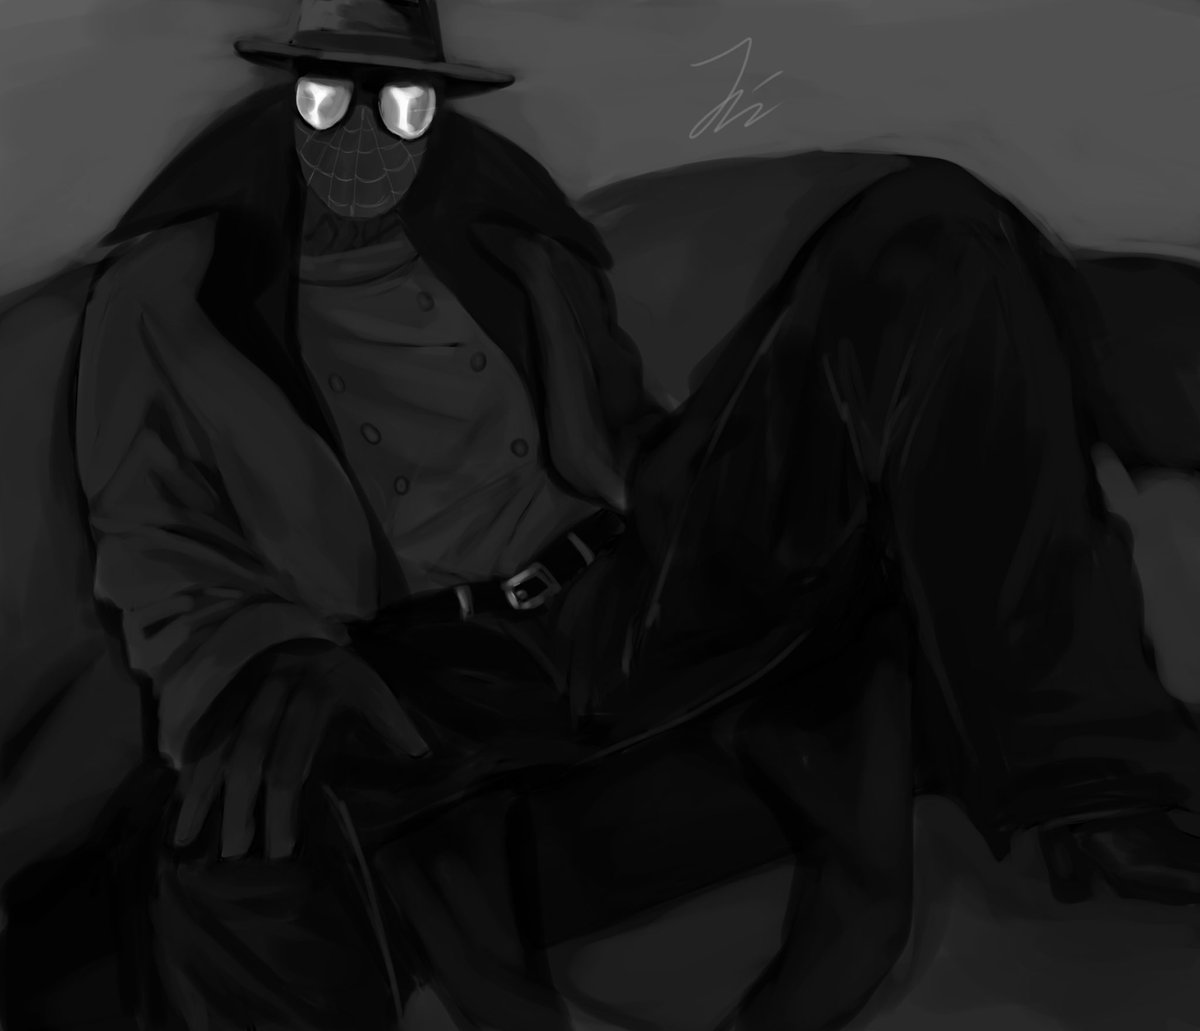 Thinking about my wife

#spidermannoir